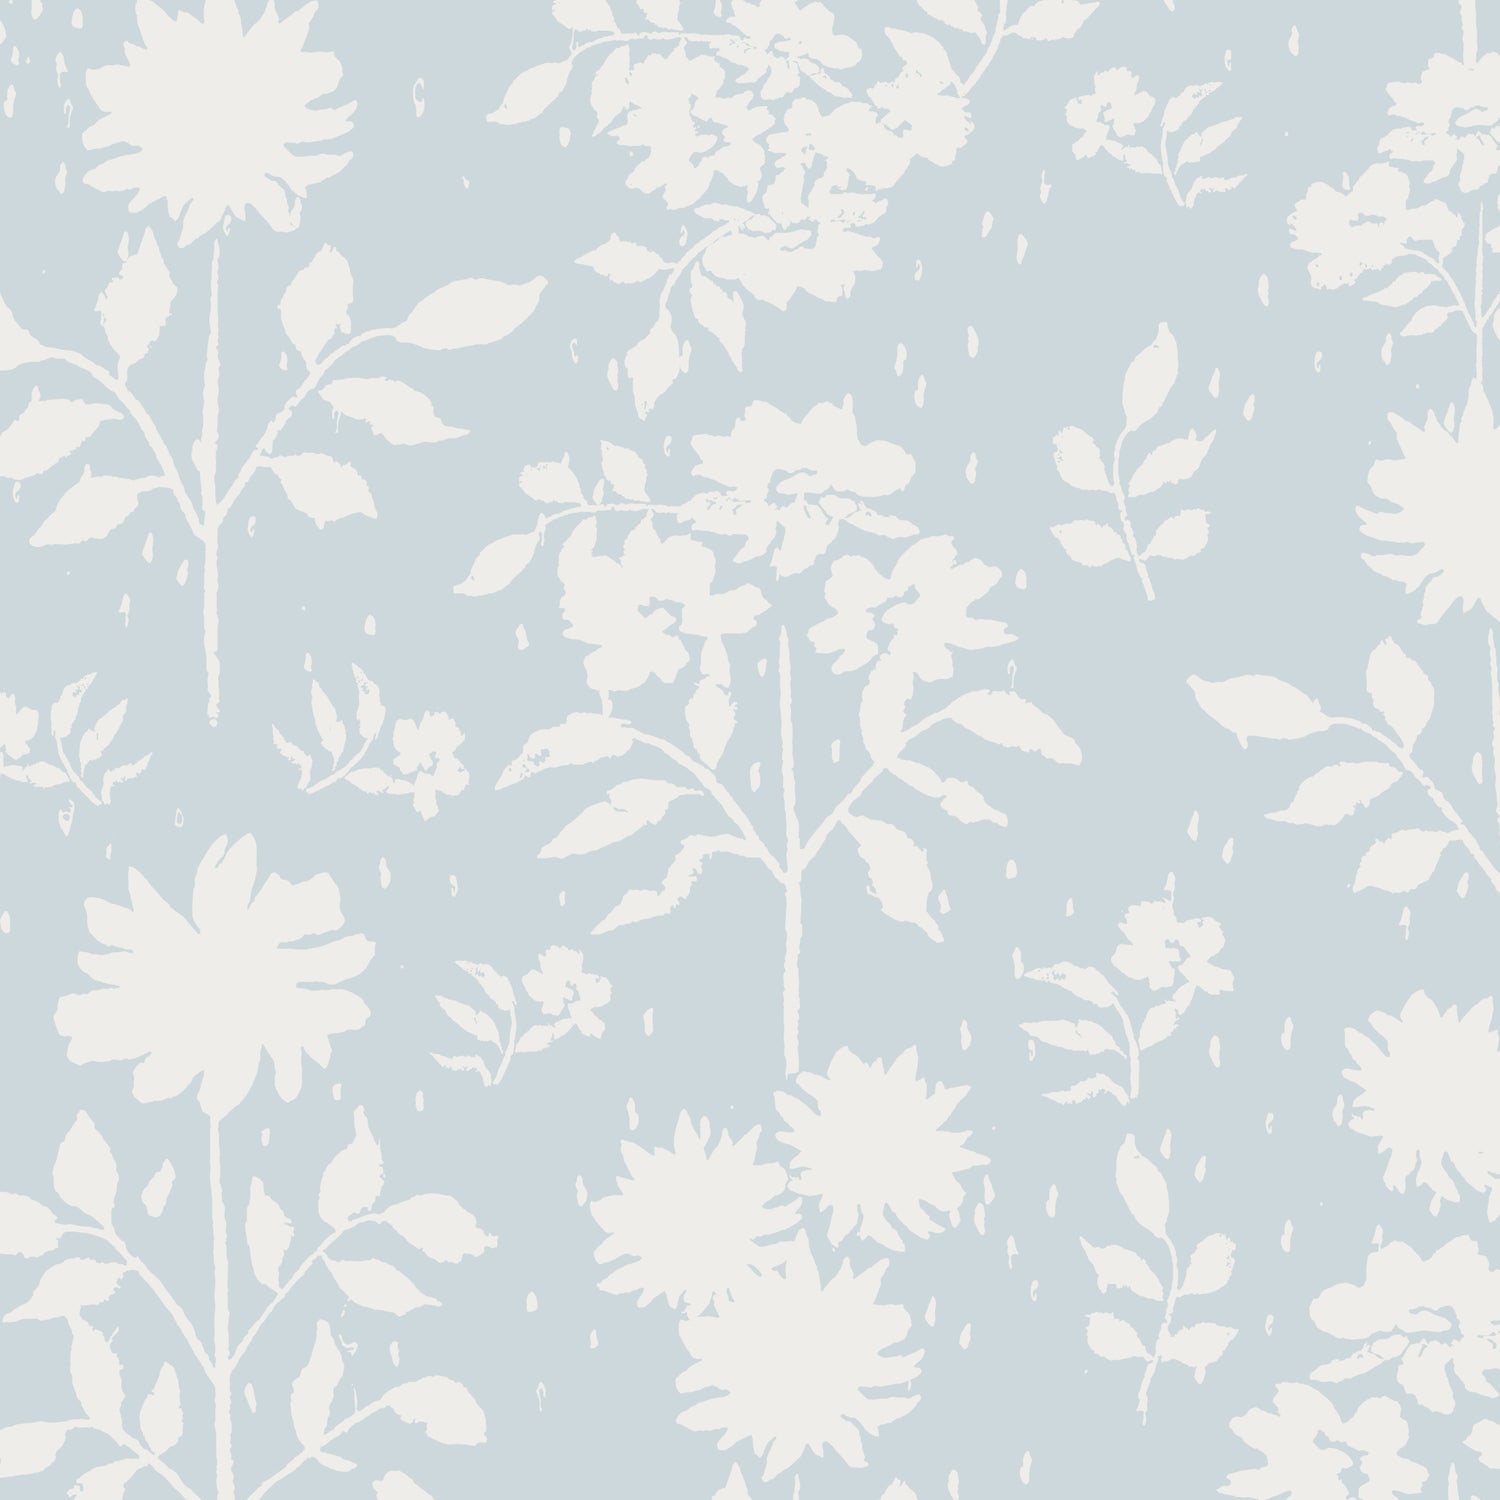 Close up of white florals on light blue background on high-quality peel and stick wallpaper